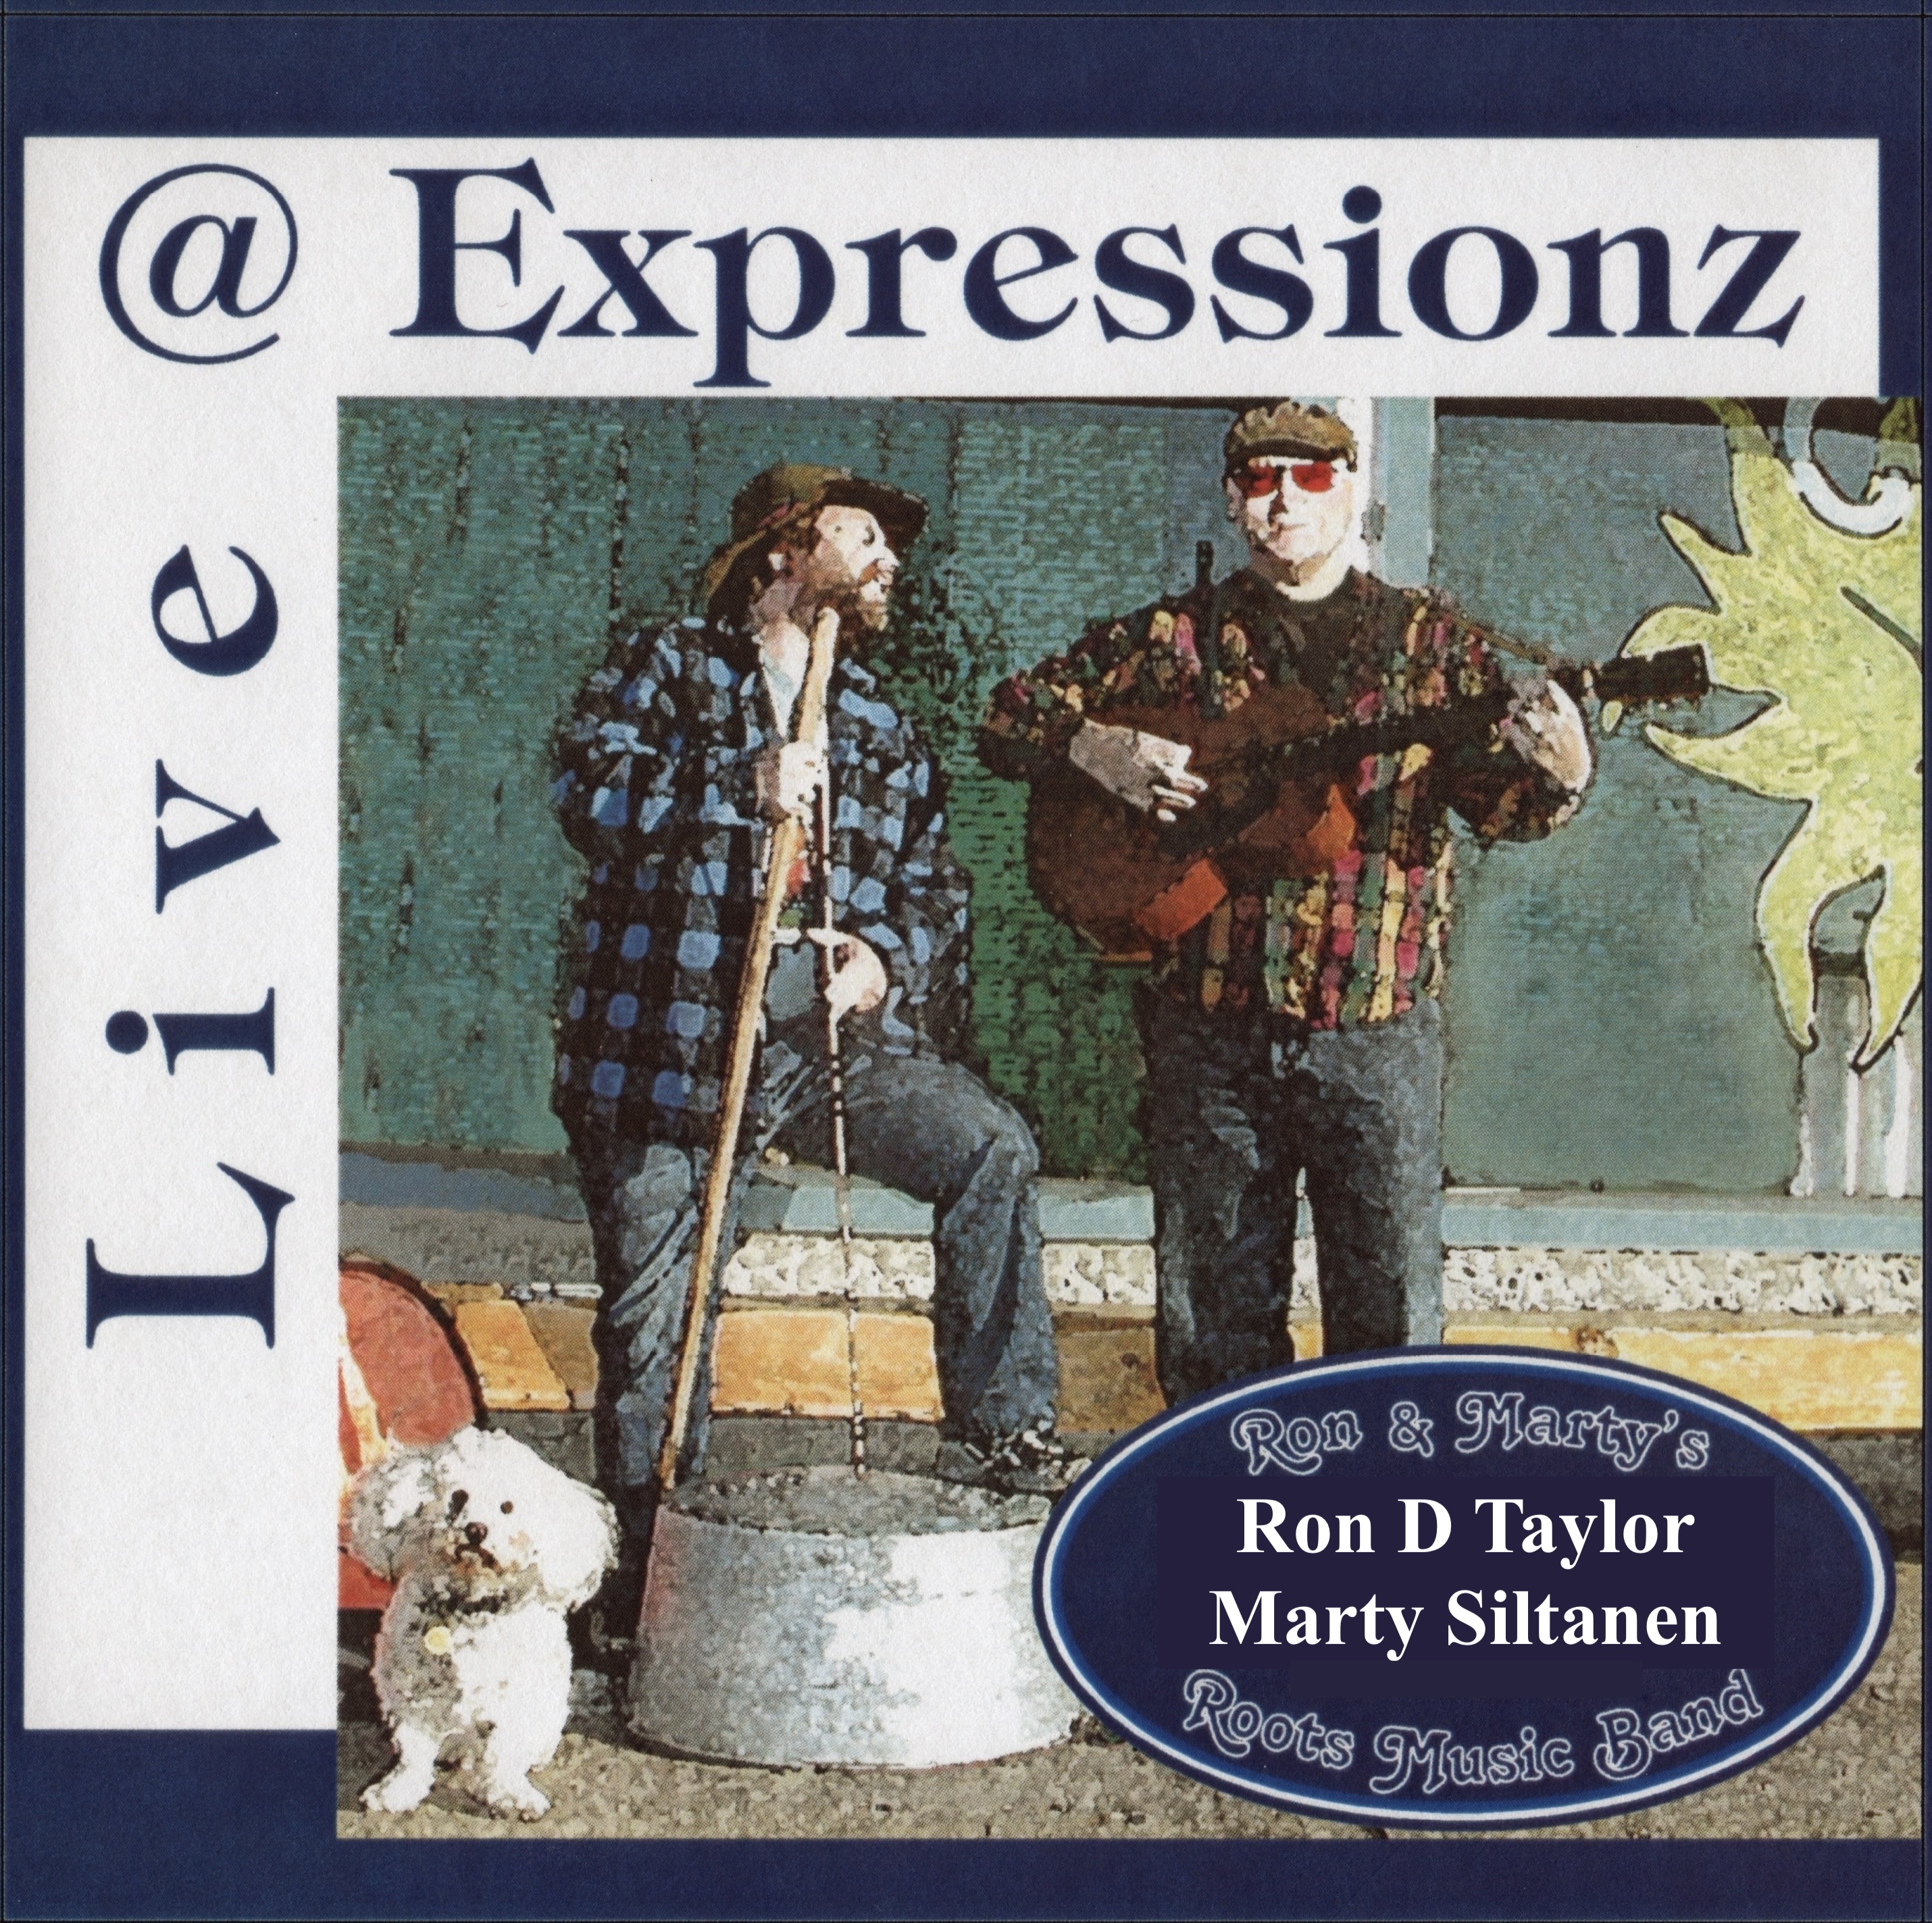 Live at Expressionz CD by Ron D Taylor and Marty Siltanen cover picture